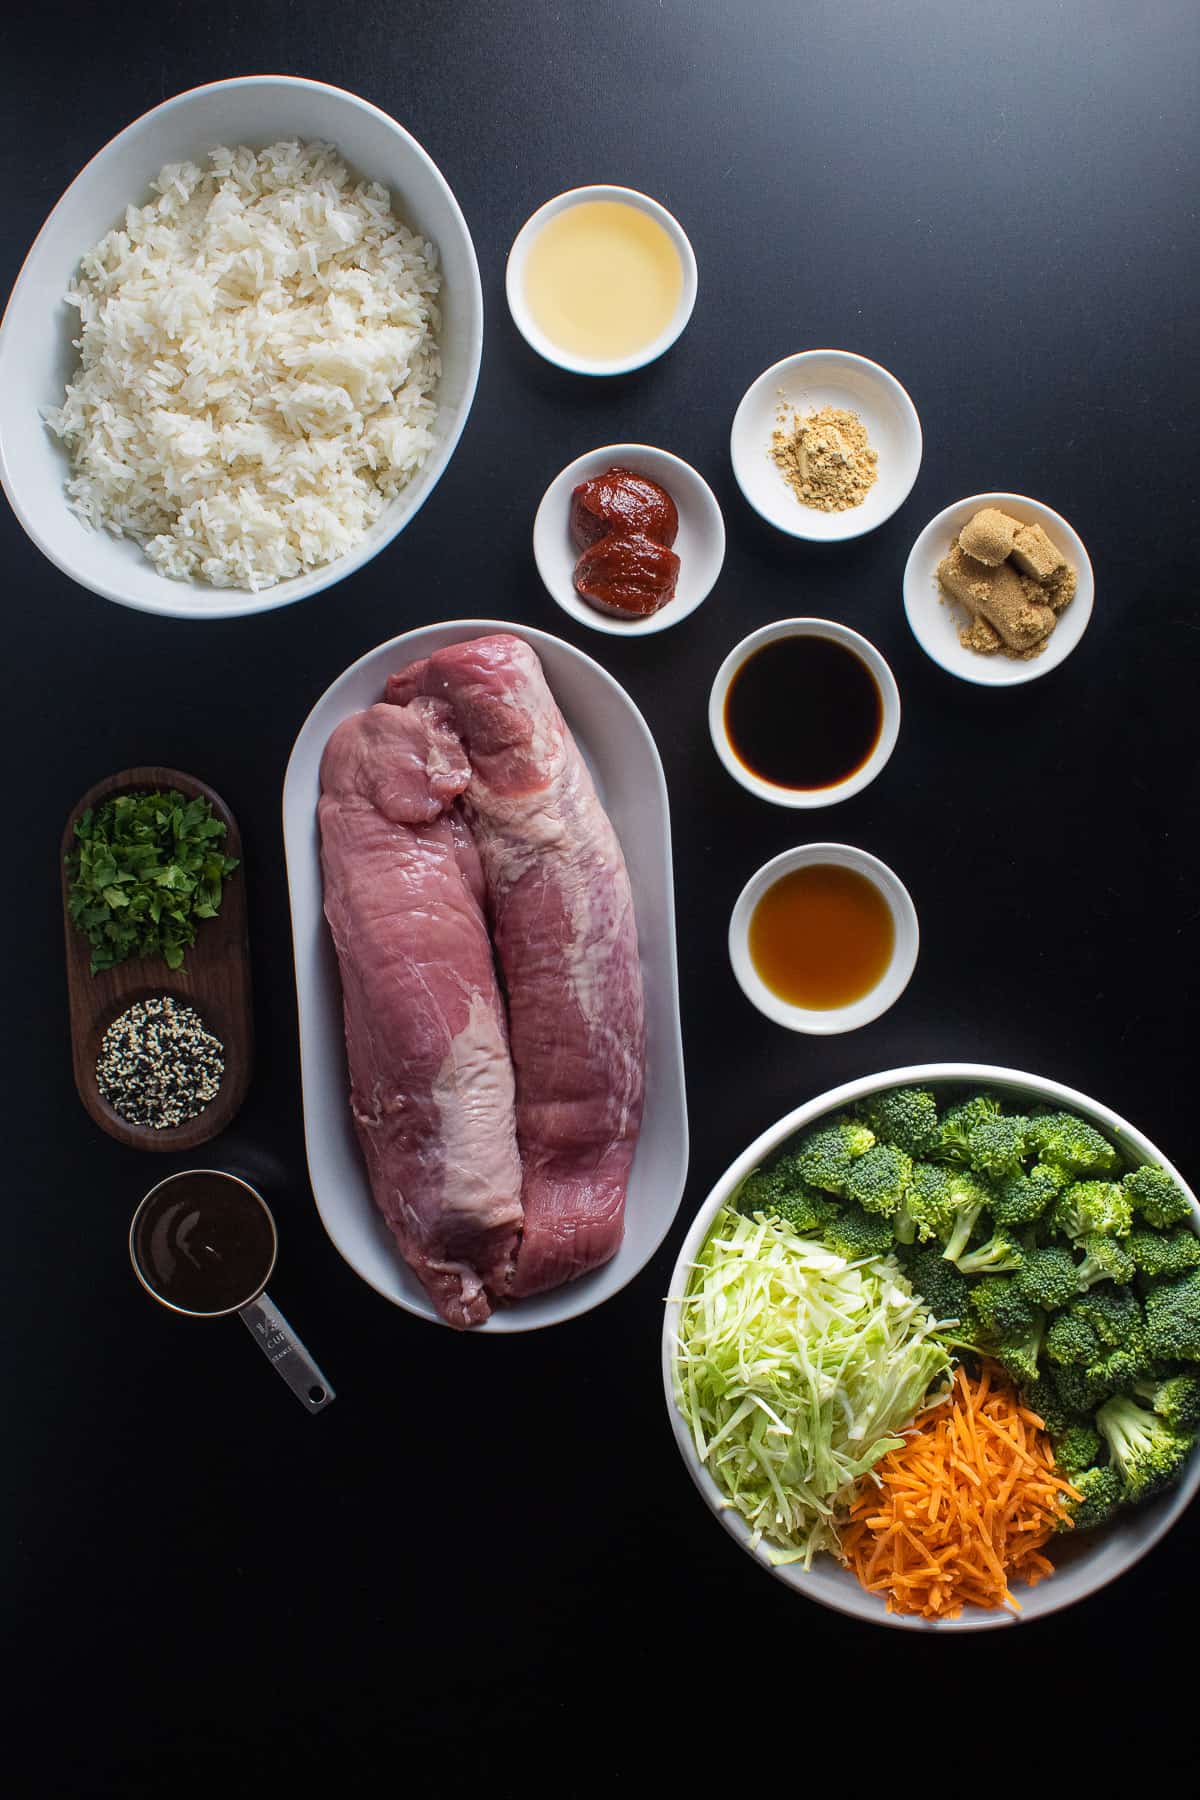 Ingredients for the hoising pork and gochujang sauce are arranged on a black surface.